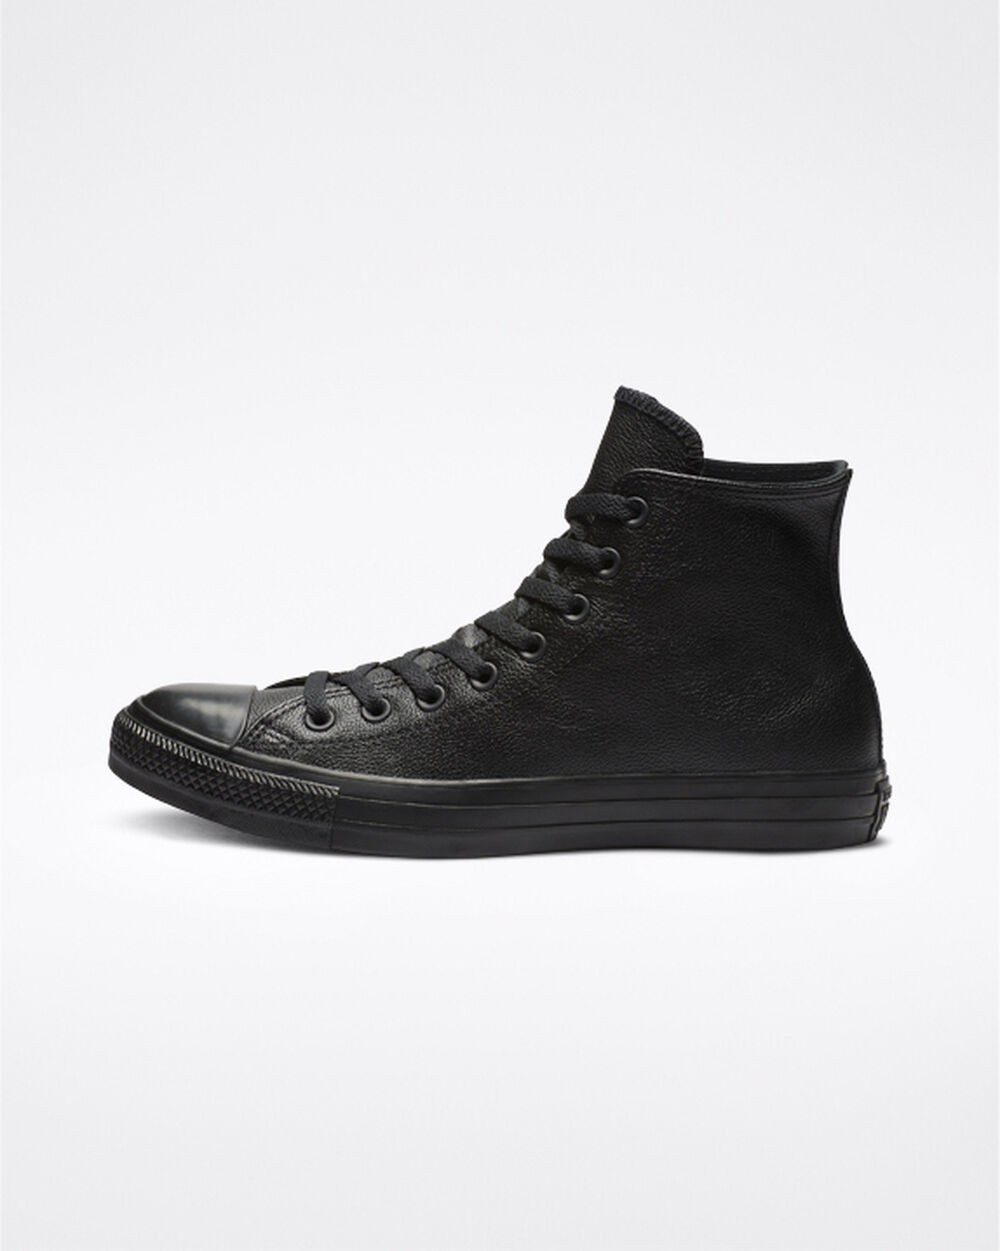 Tenis Converse Chuck Taylor All Star Mujer Negros | Mexico-764636